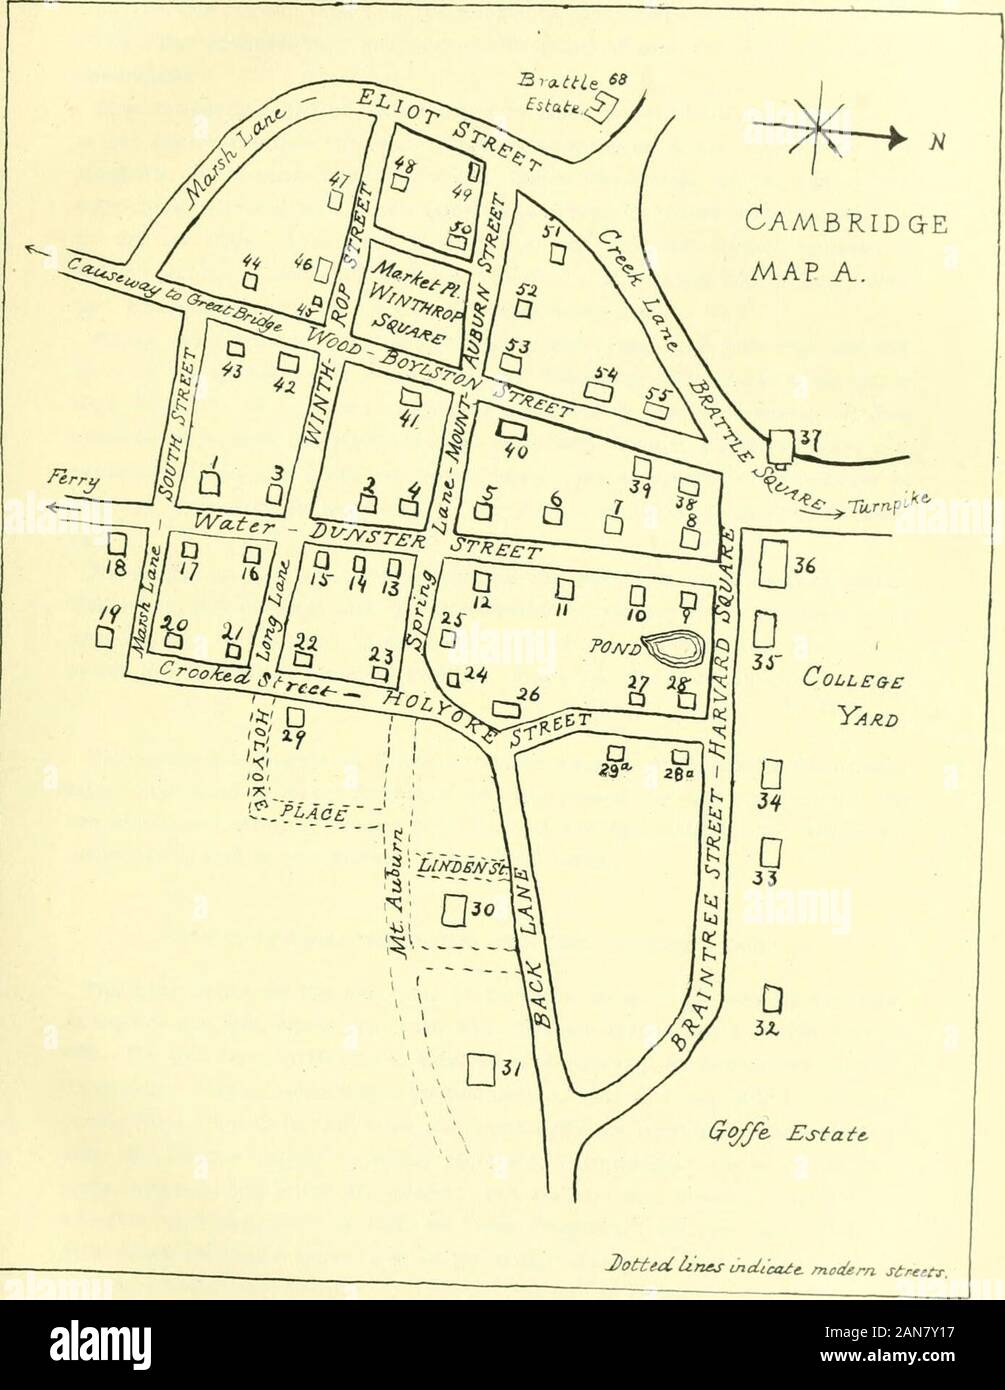 An historic guide to Cambridge . .29a. White-Collins. 30. Apthorp (Bishops Palace)-Borland-QuarTers of Putnam and Burgoyne. 31. Daniel Gookin-Oliver-Phips-Winthrop-McKay. 32. Old Parsonage. 33. Sewall. 34. Hooker-Thomas Shepard-Mitchell-Leverett-Wigglesworth. 35. Presidents or Wadsworth House. 36. Second, Third and Fourth Meeting-houses. 37. Court House. 38. P.radstreet-Pelham. 39. Rev. Samuel Stone-Nathaniel Sparhawk-Gove-Bunker. 40. Thomas Beale-Andrew Belcher-Blue Anchor Tavern-Birthplace of Governor Jonathan Belcher. 41. Ensign-Hicks-Samuel Whittemore-Watson. 42. Patrick-Cane-Prof. Judah M Stock Photo